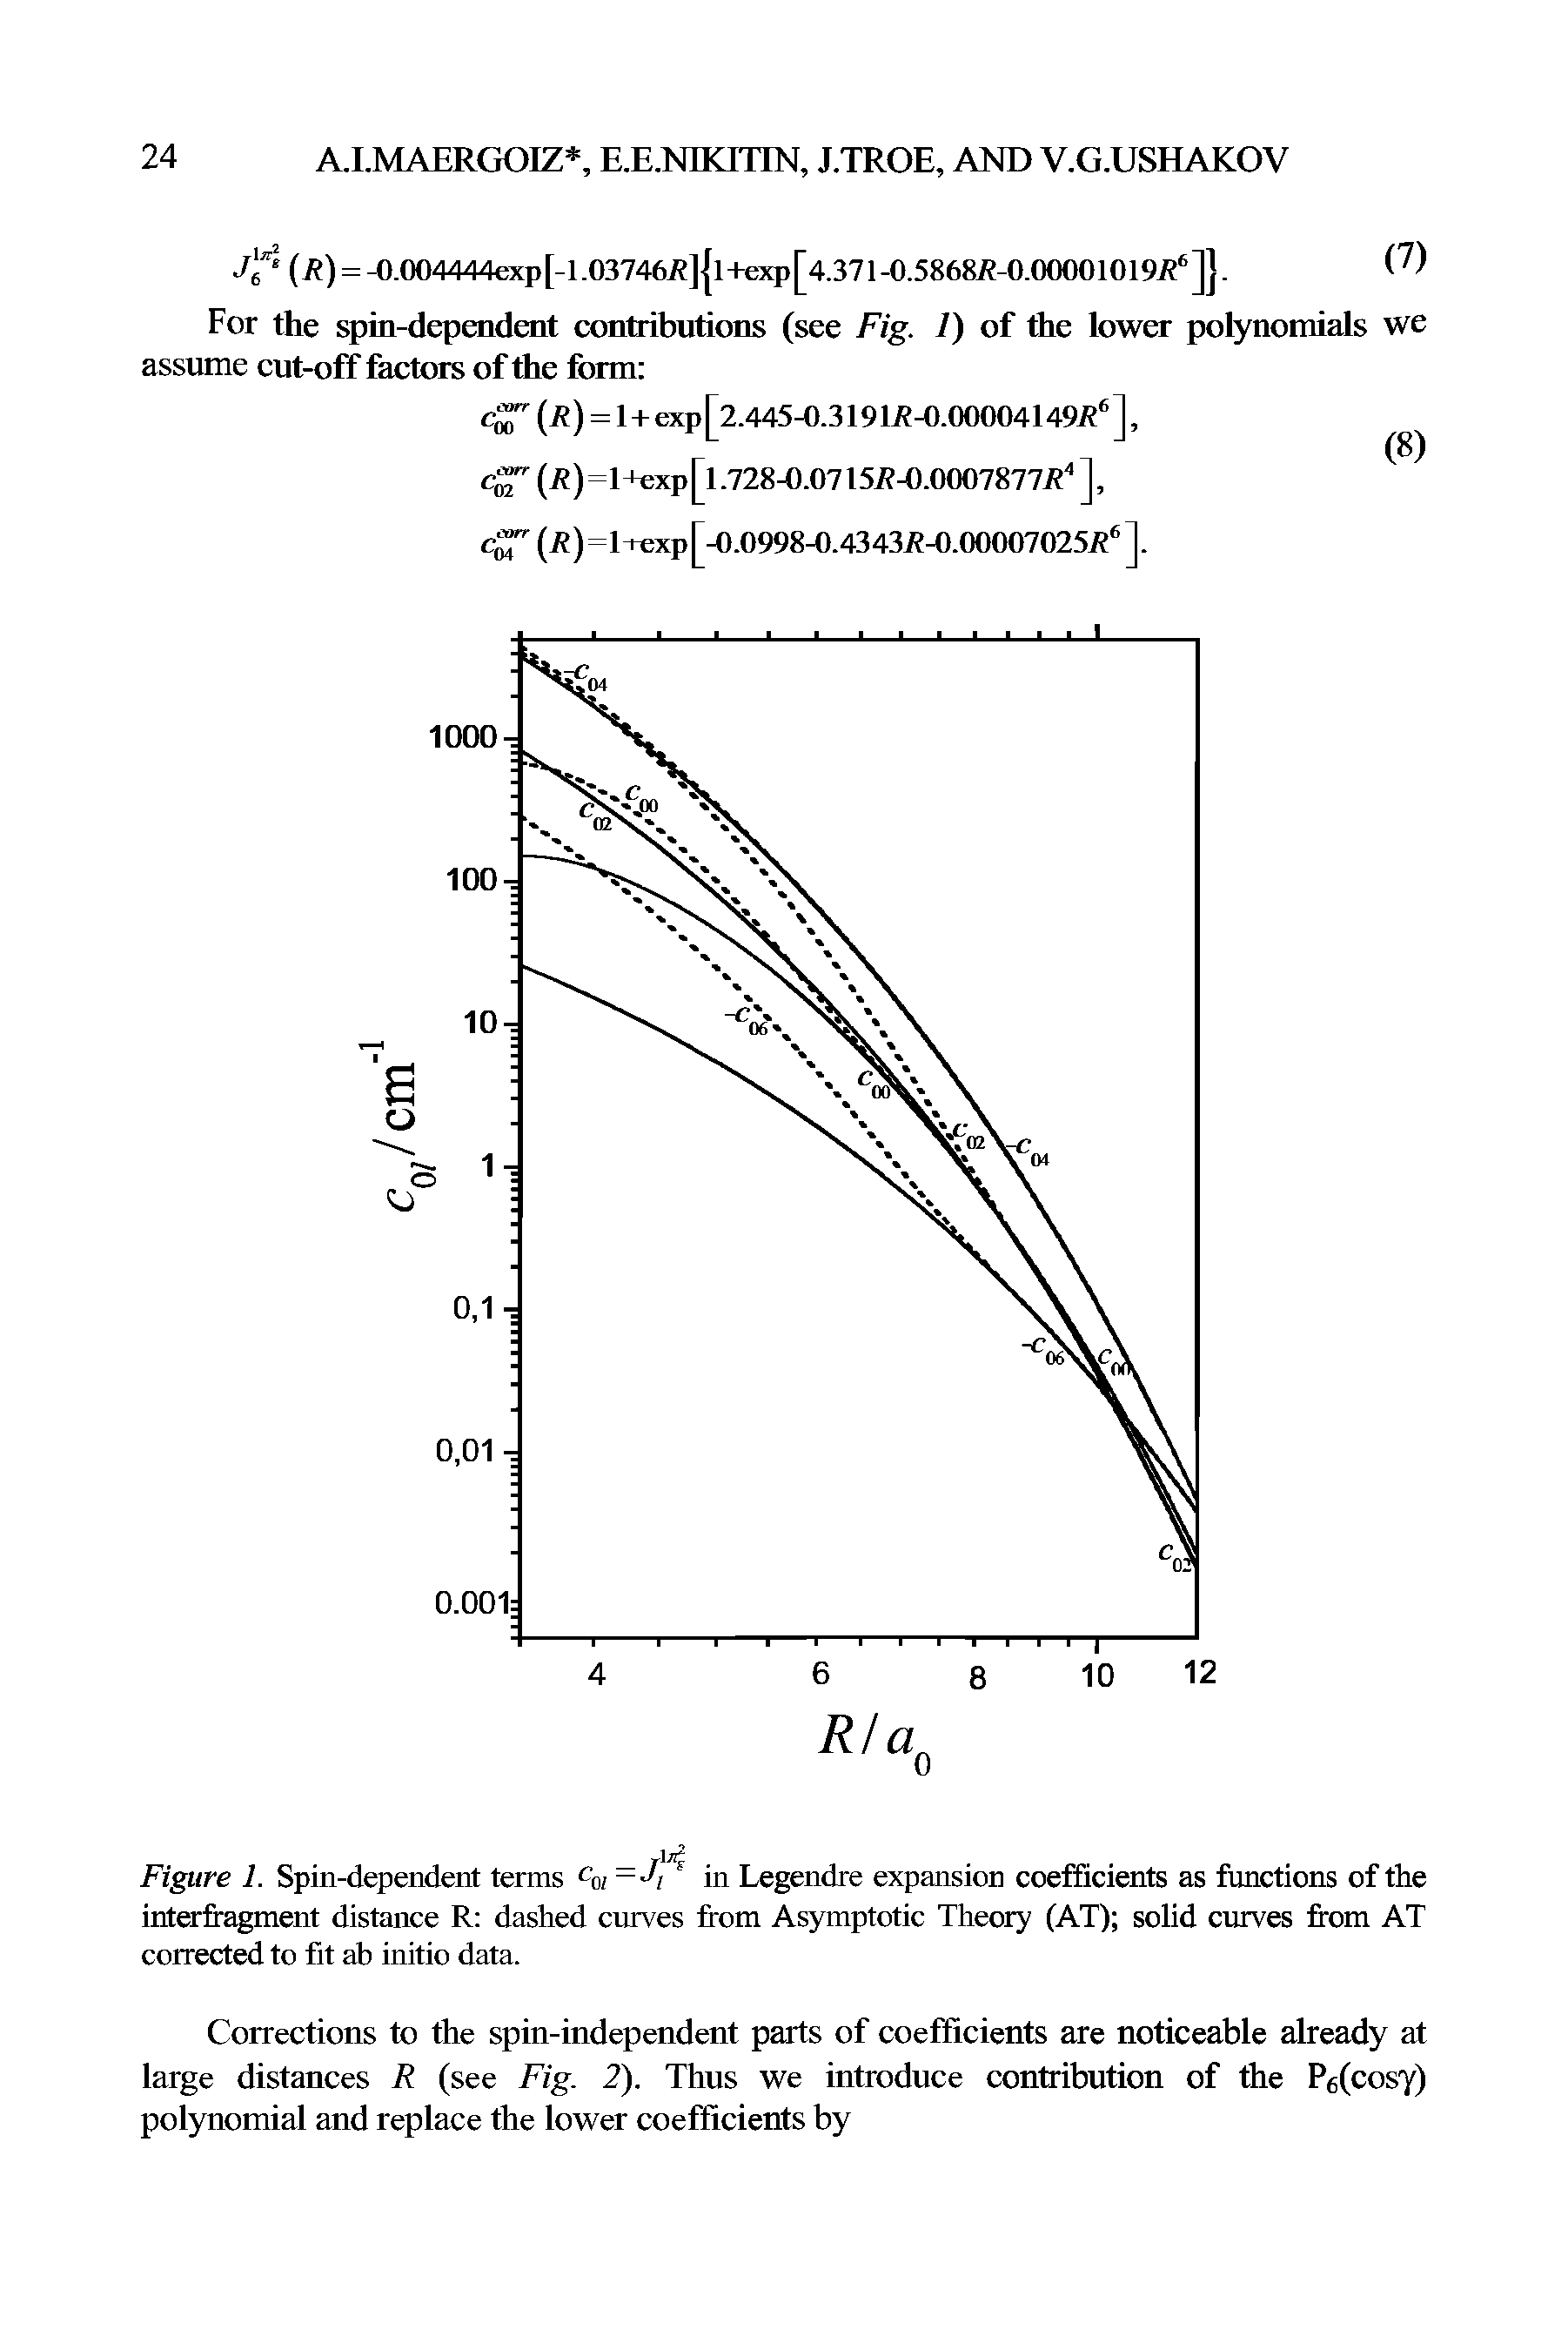 Figure 1. Spin-dependent terms Cq, —7, in Legendre expansion coefficients as functions of the interfragment distance R dashed curves from Asymptotic Theory (AT) solid curves from AT corrected to fit ah initio data.